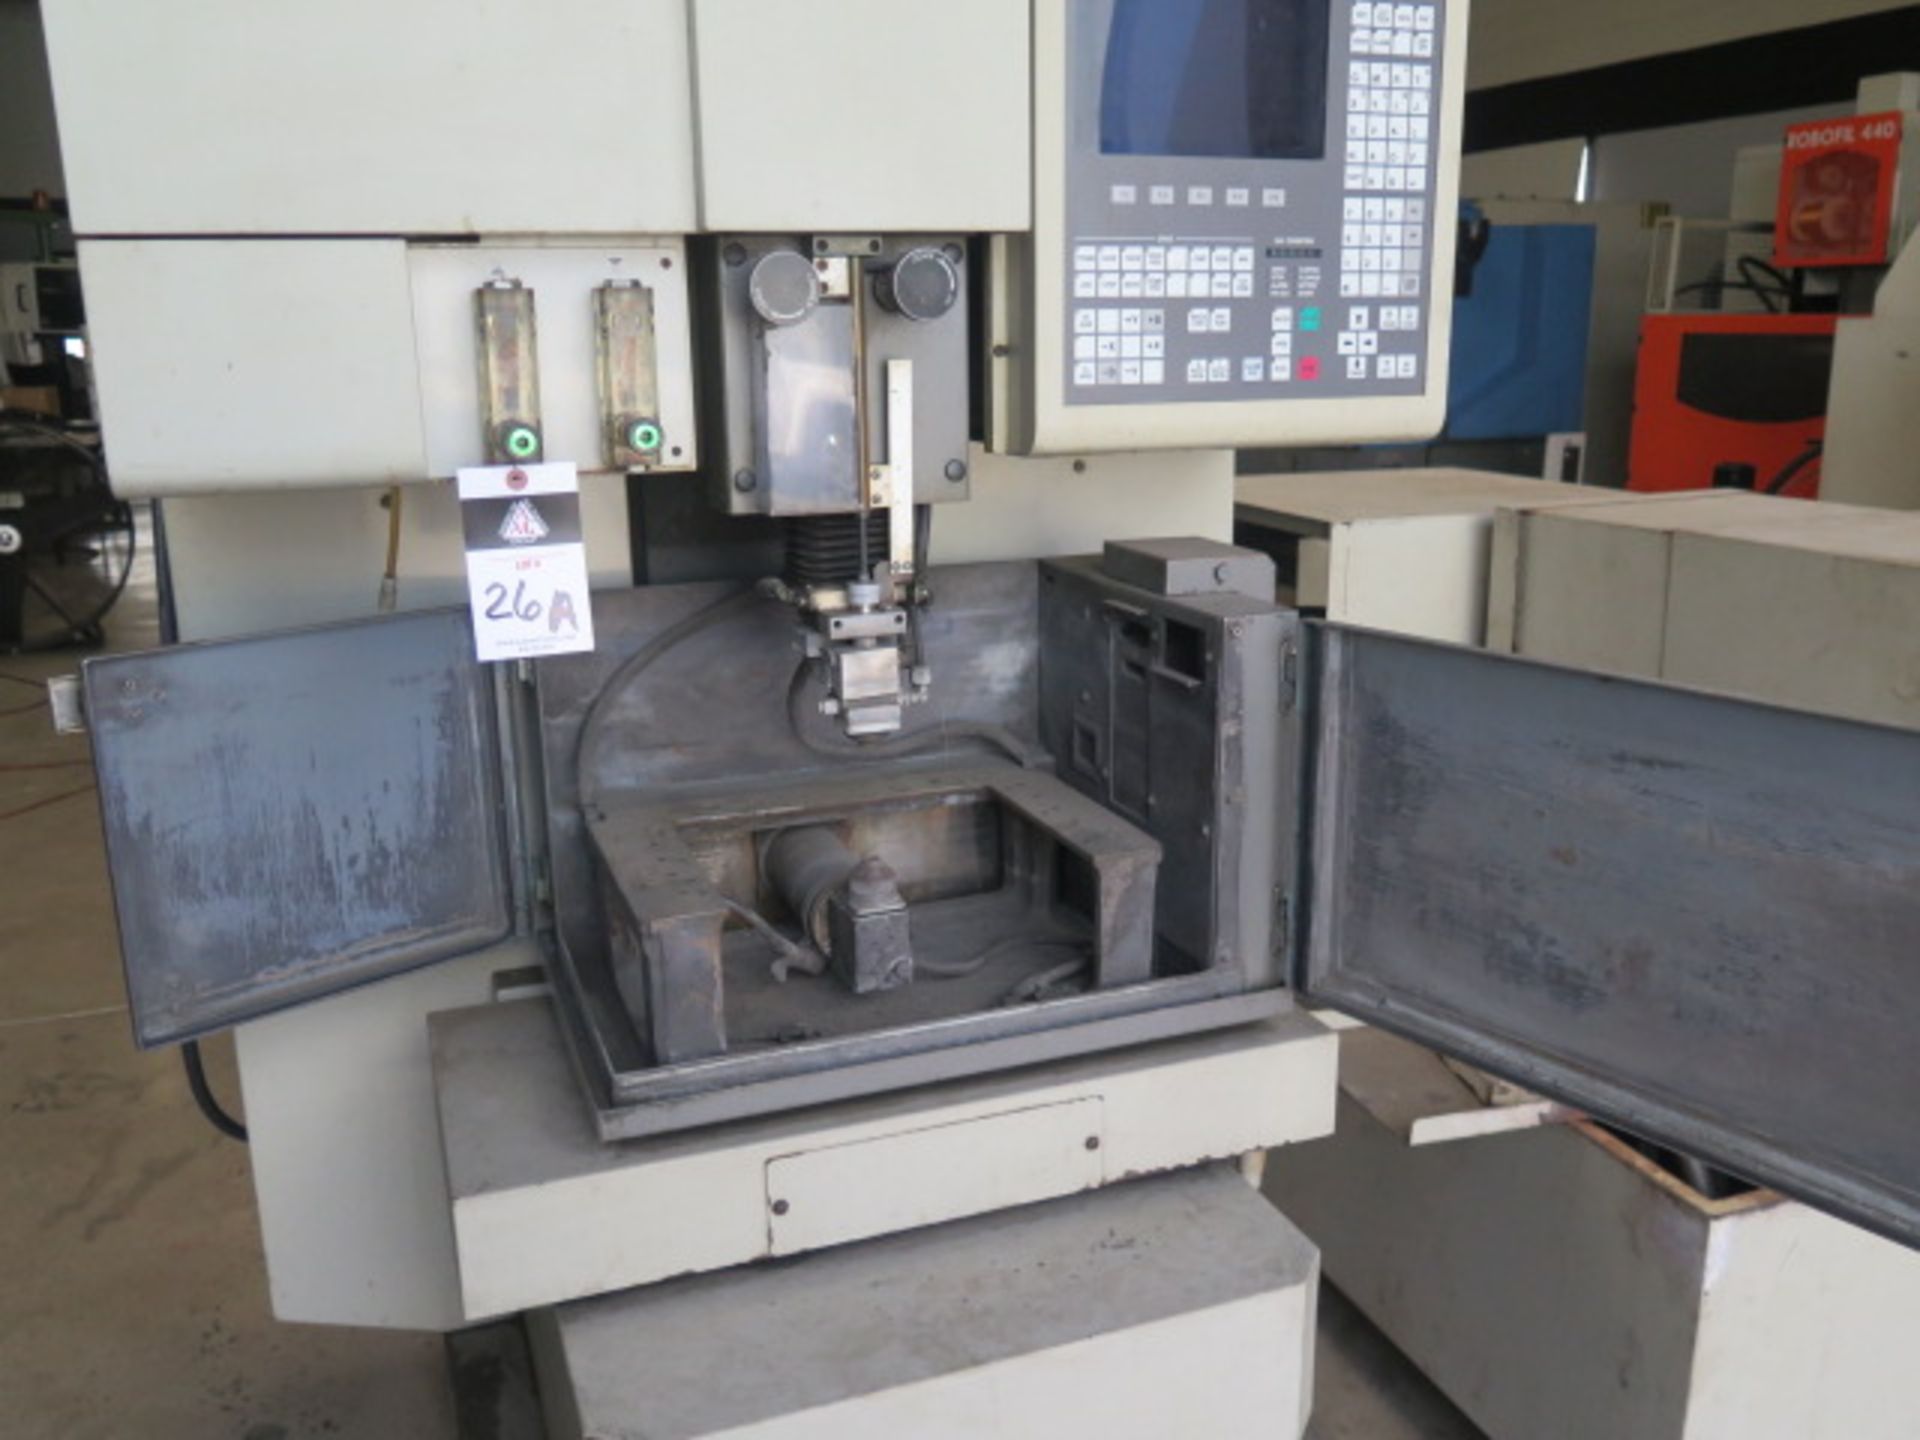 Brother HS-3100 CNC Wire EDM s/n 111120 w/ Brother CNC Controls, 8 3/4" x 11" Work Area, SOLD AS IS - Image 5 of 13